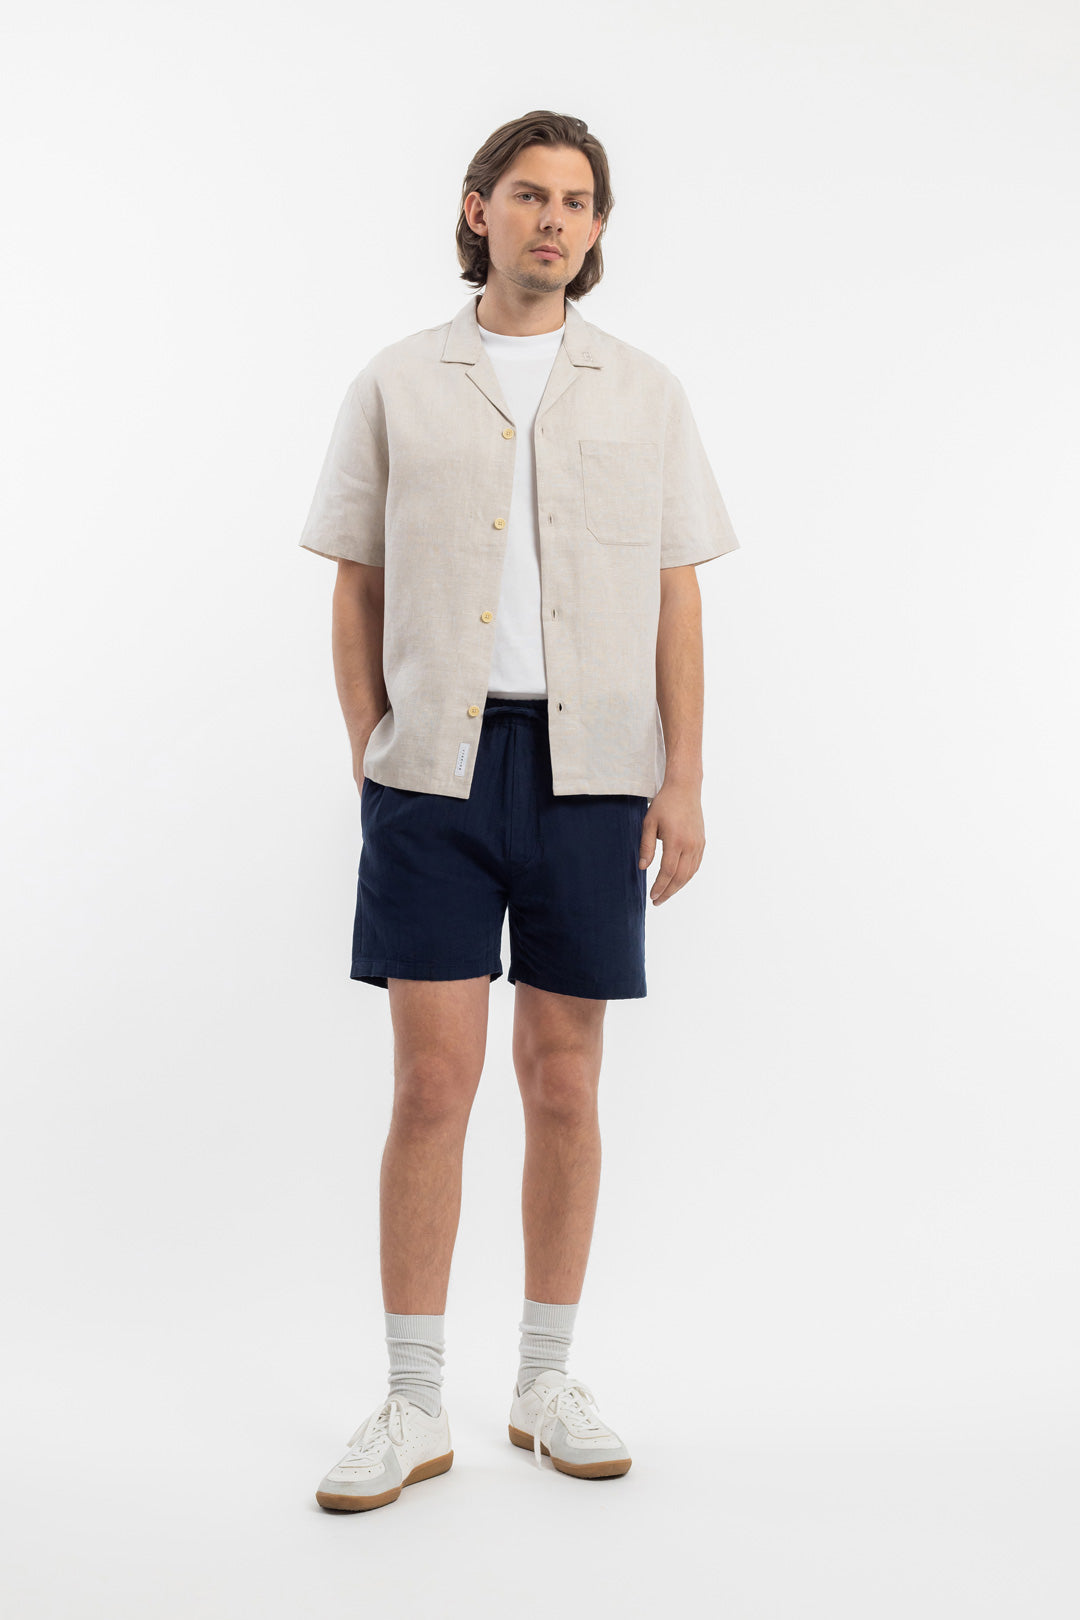 White Bowling shirt made from organic cotton &amp; linen by Rotholz